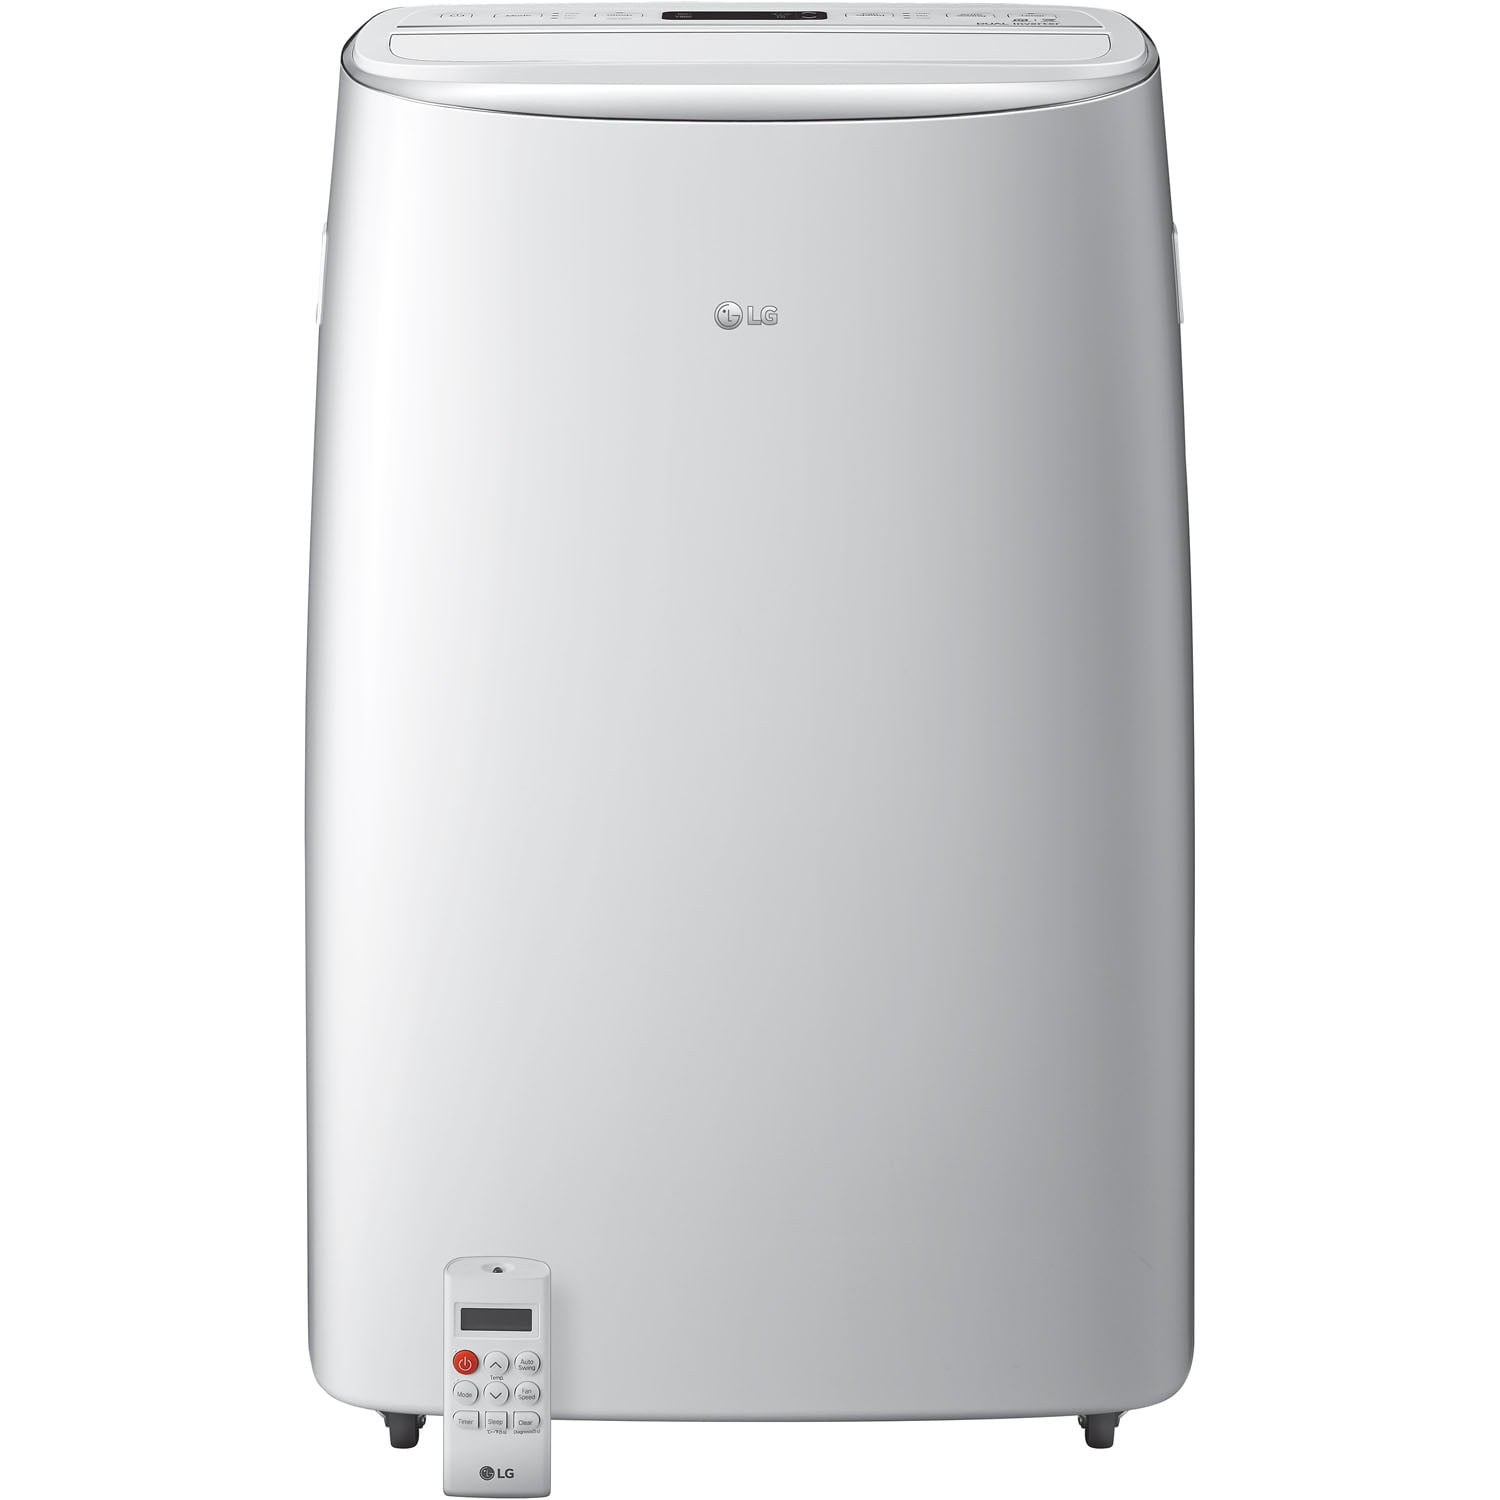 LG 115V Dual Inverter Air Conditioner with Wi-Fi Control in for Rooms up to 500 Sq. Ft. - Walmart.com